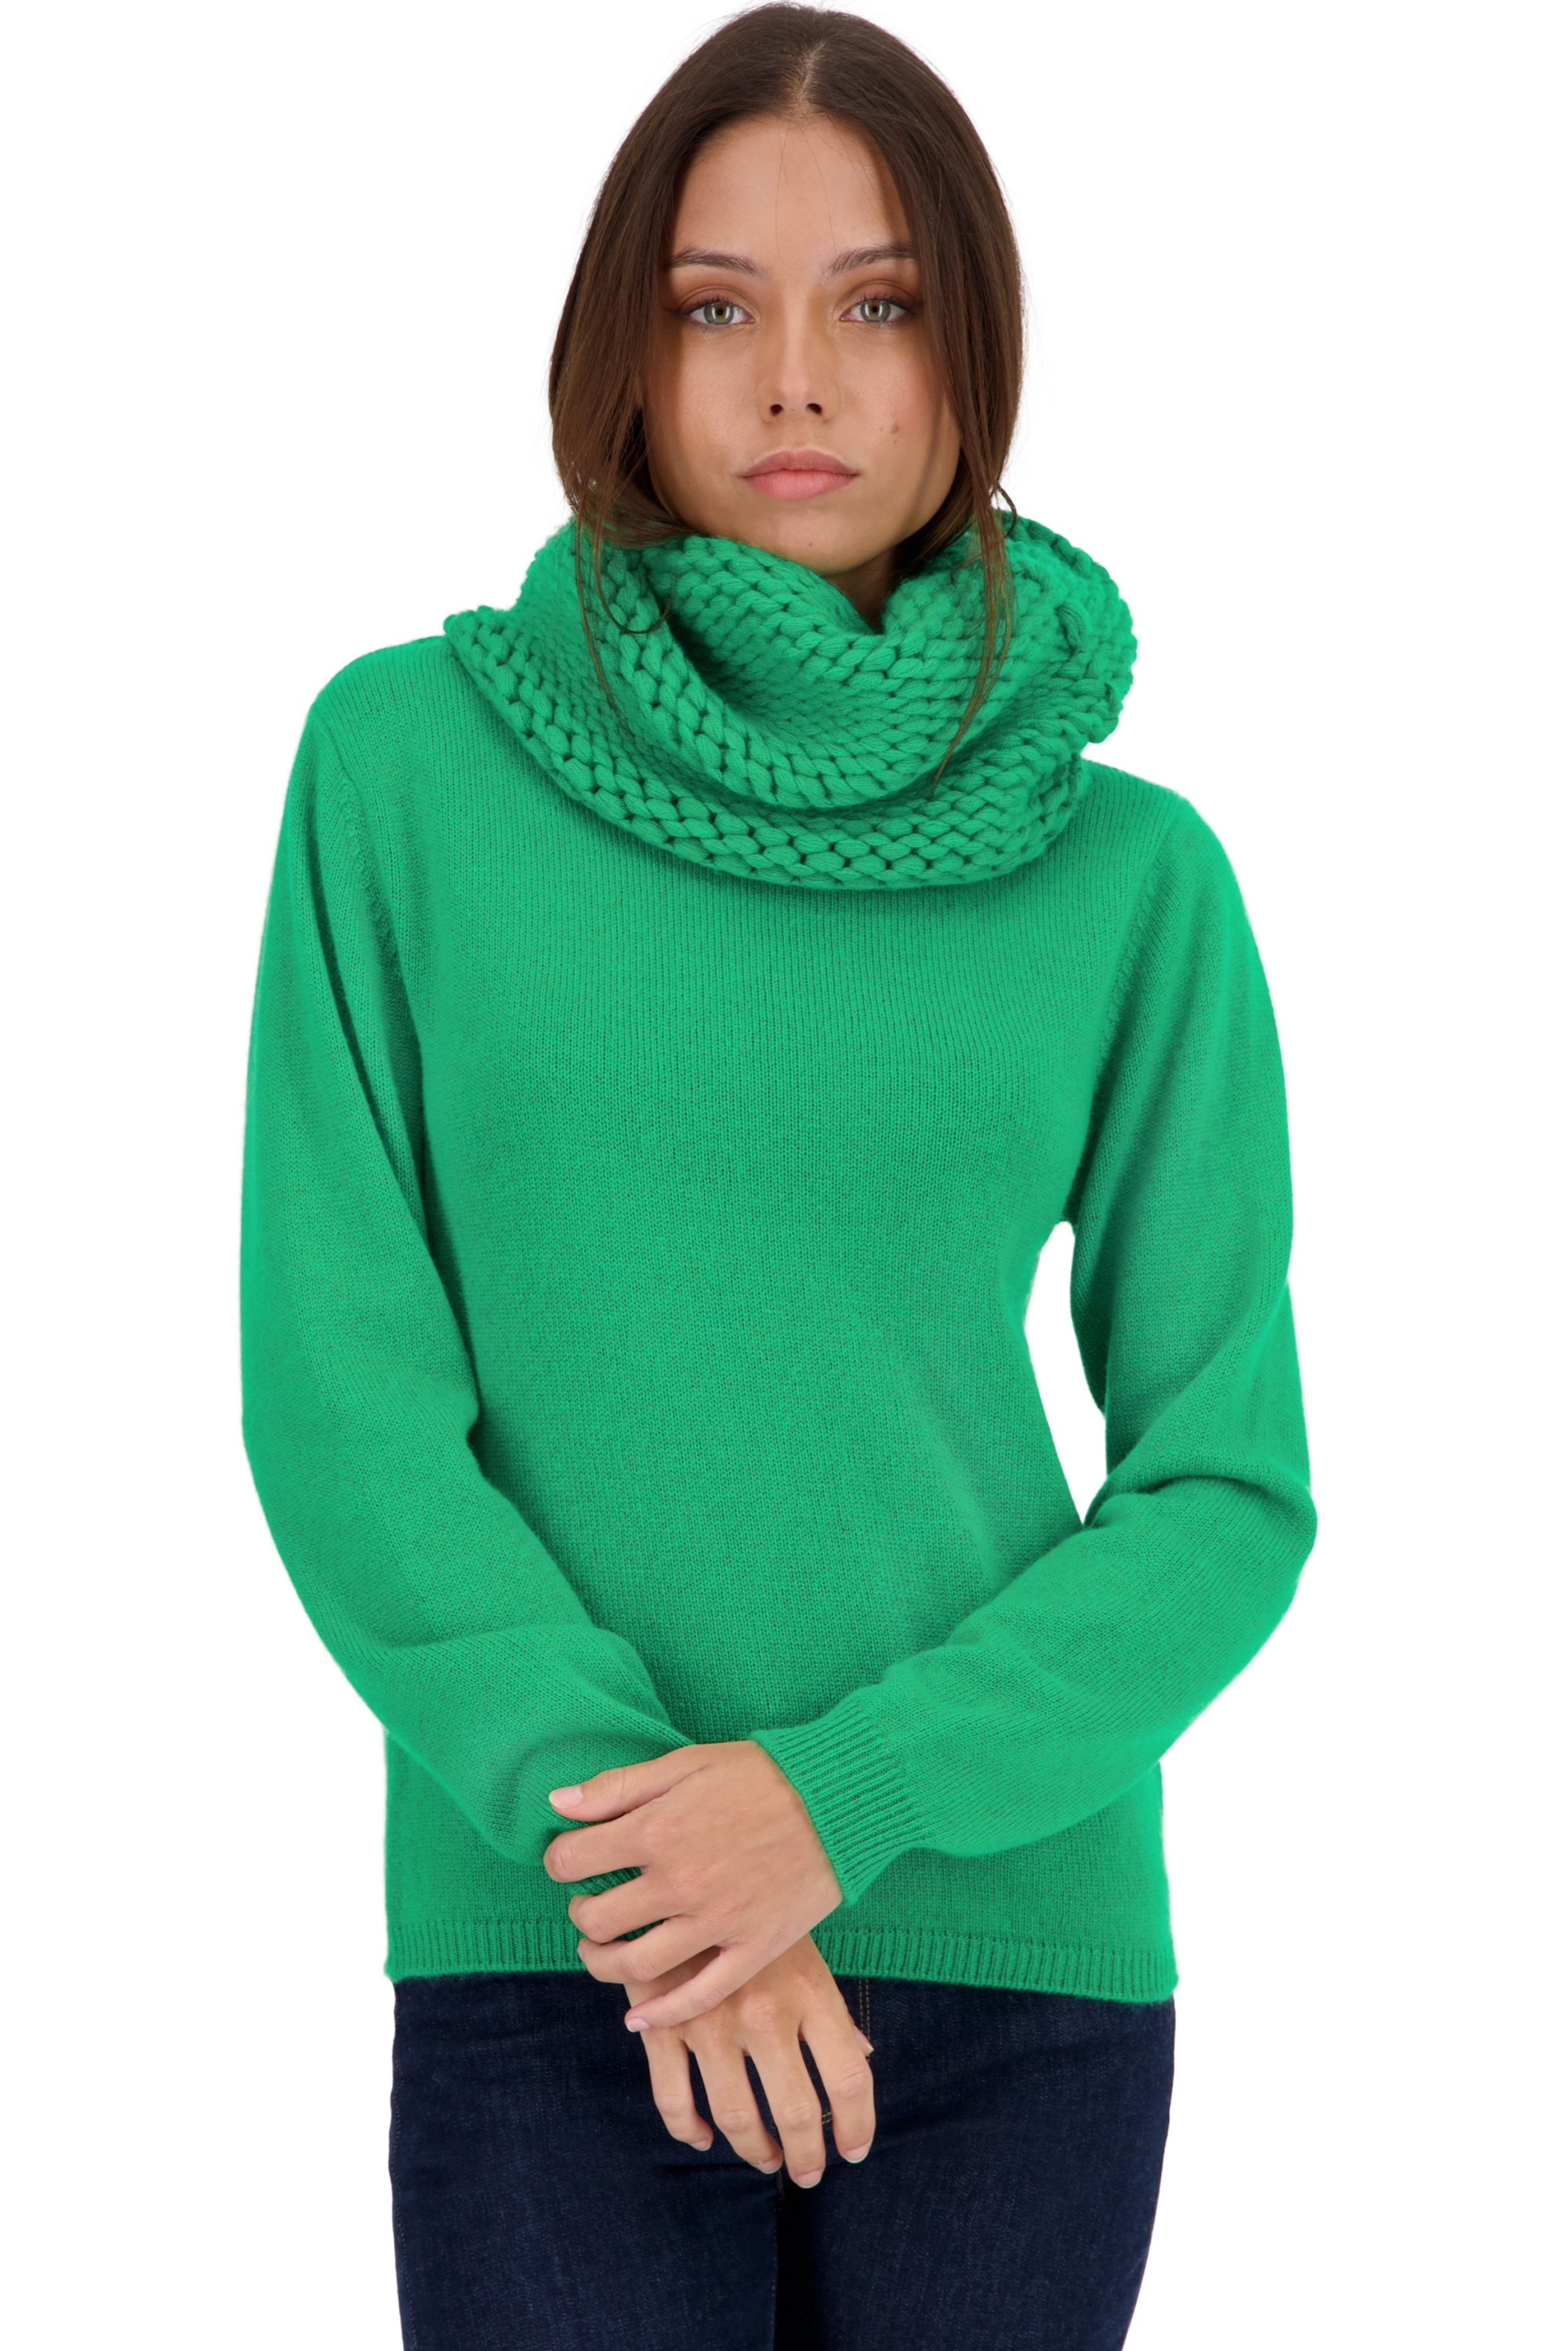 Cachemire pull femme col roule tisha new green 2xl